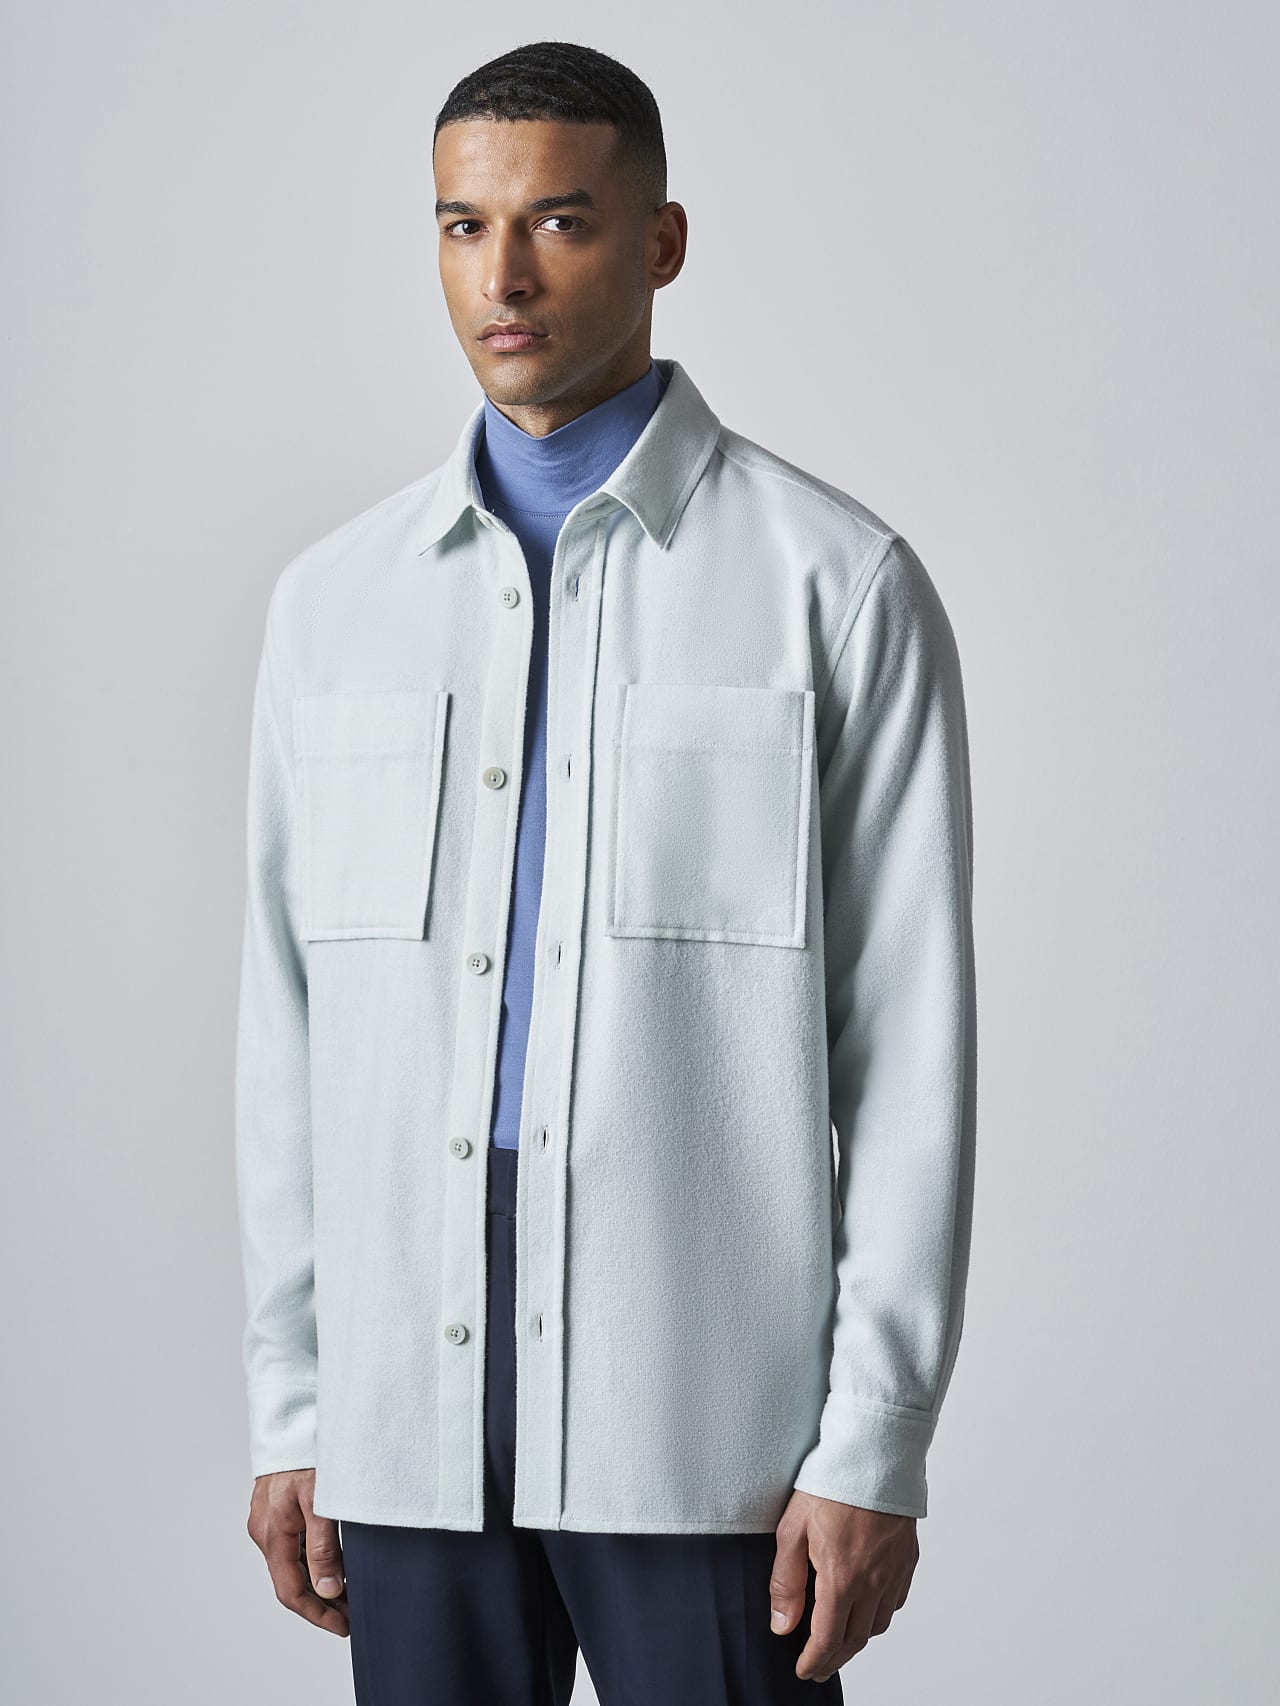 AlphaTauri | WOVER V1.Y5.02 | Wool Over-Shirt in Pale Blue  for Men